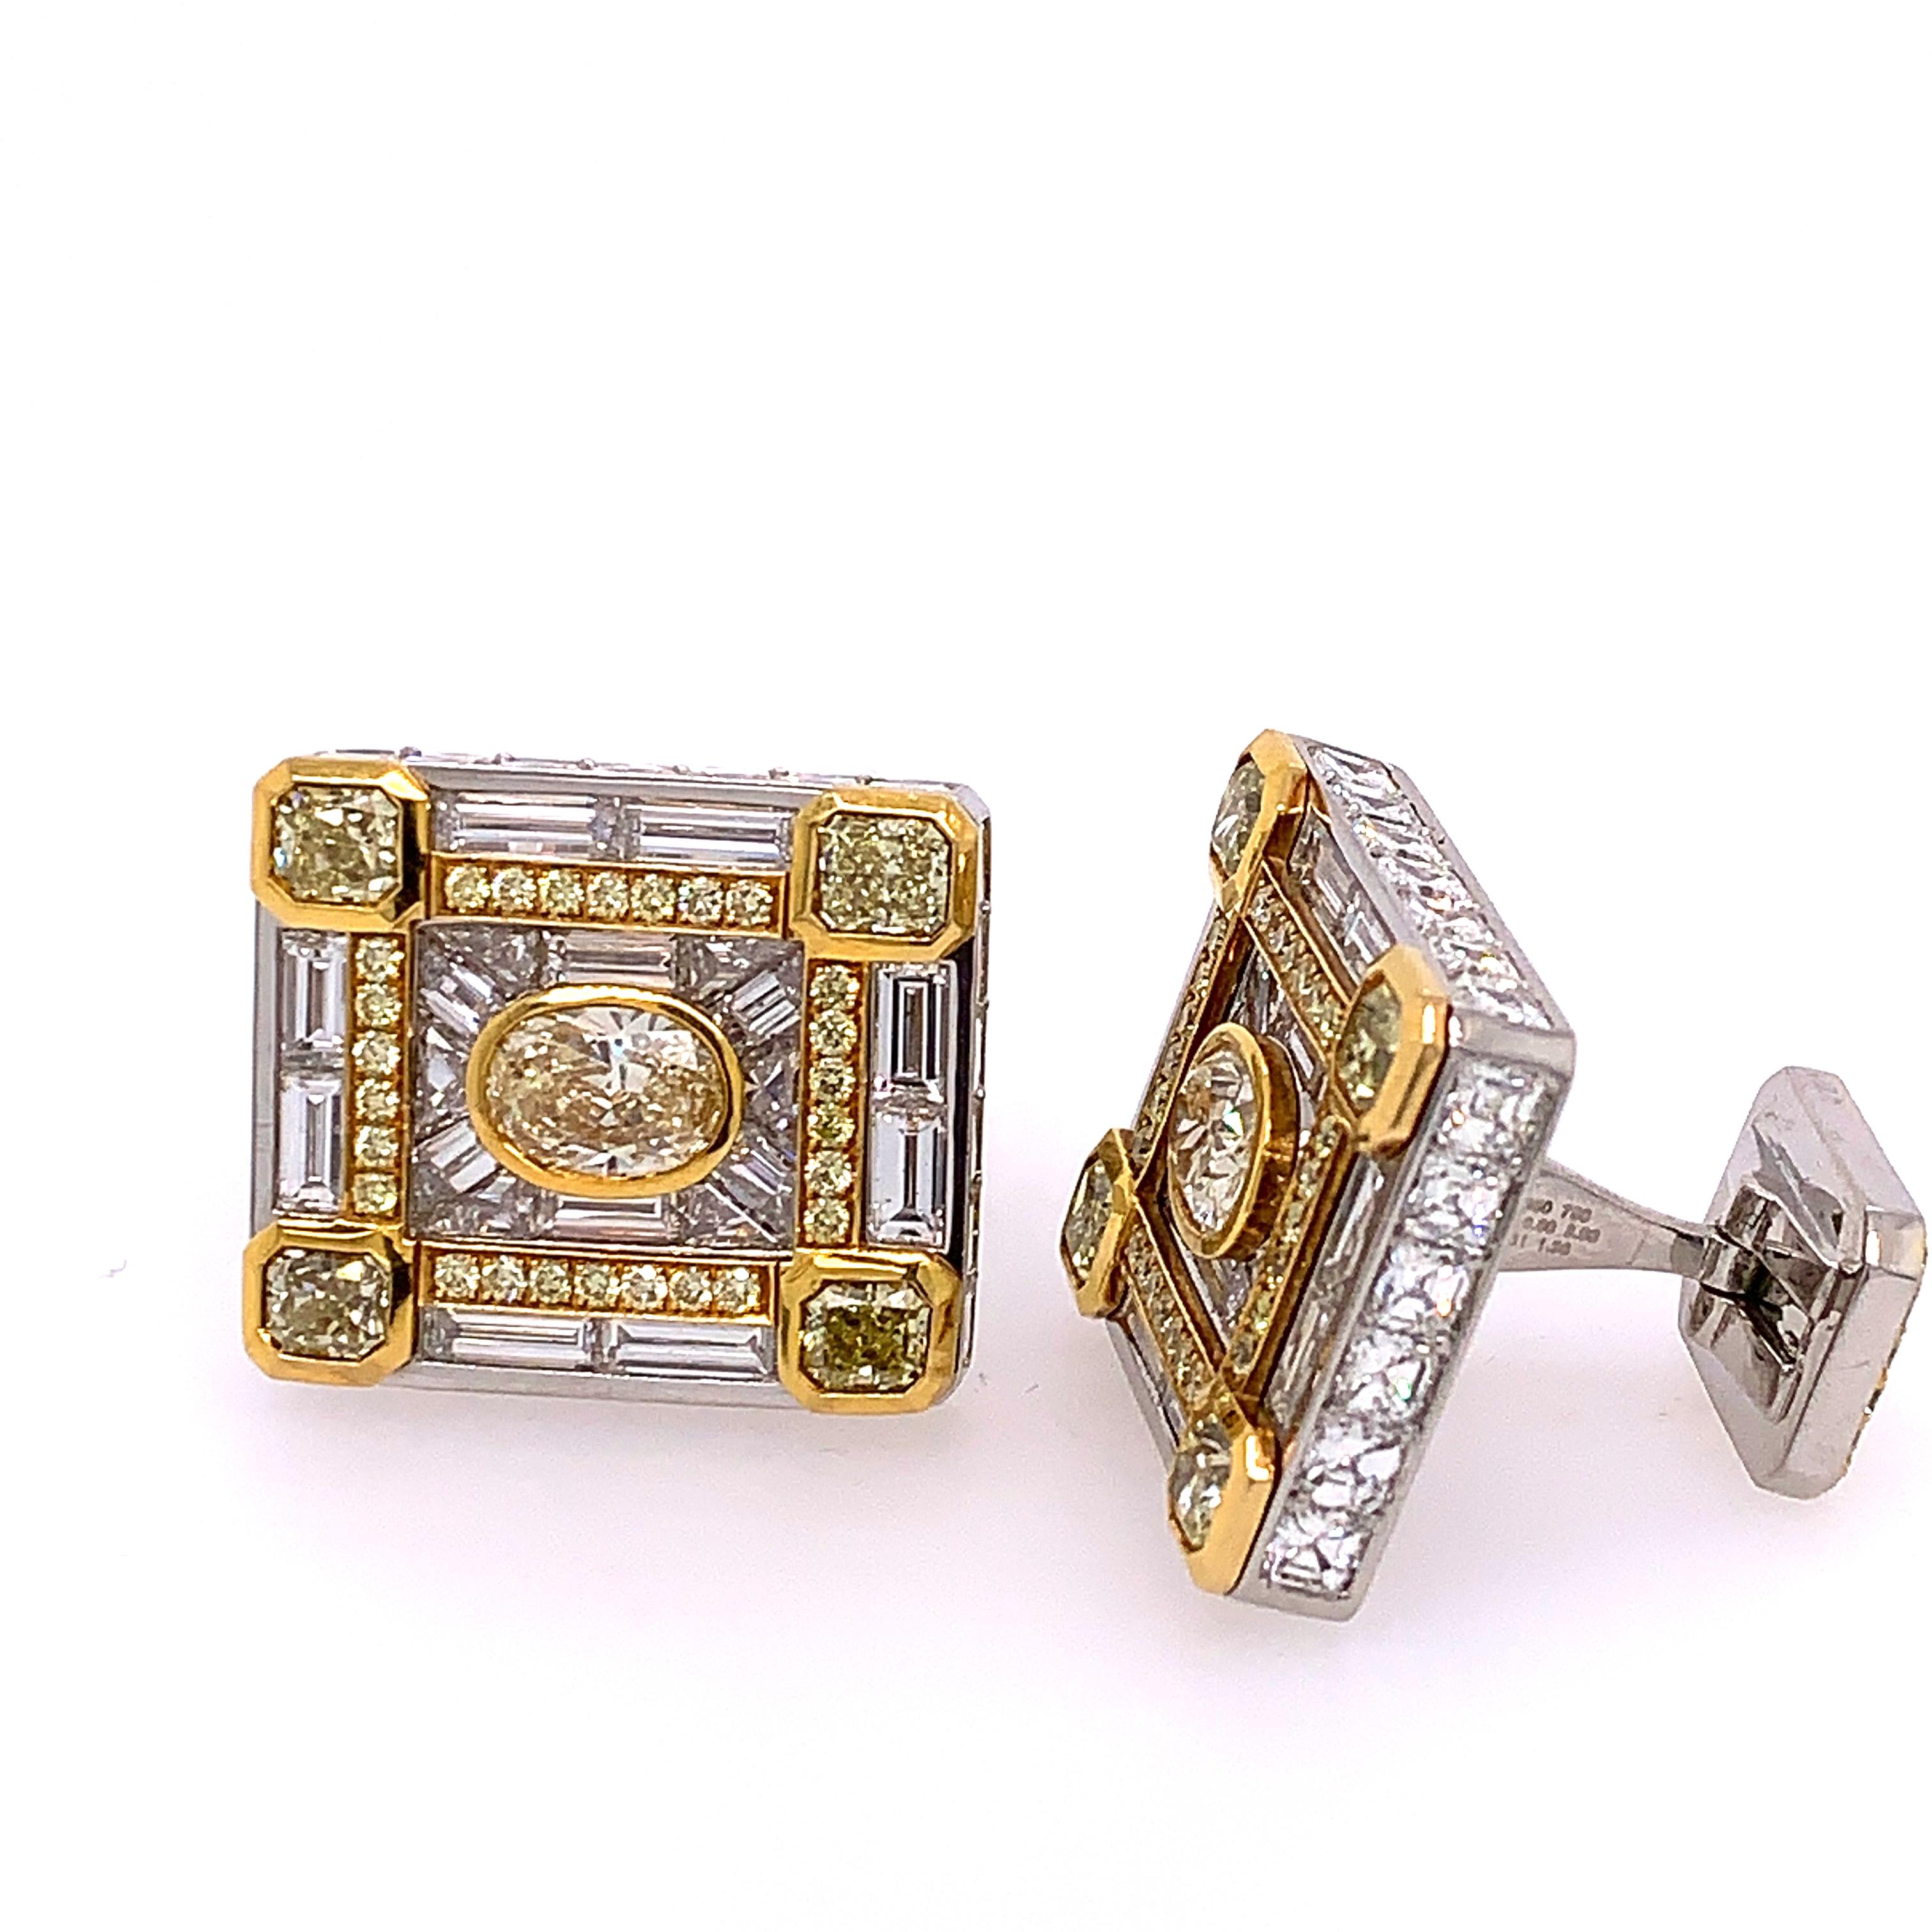 These beautiful Diamond Cufflinks contain 2 Oval-Shaped Light Yellow diamonds totaling 2.03 carats, 8 Radiant-Cut Light Yellow diamonds totaling 3.00 carats, as well as baguette, square-emerald-cut, and triangular-shaped diamonds totaling 13.30